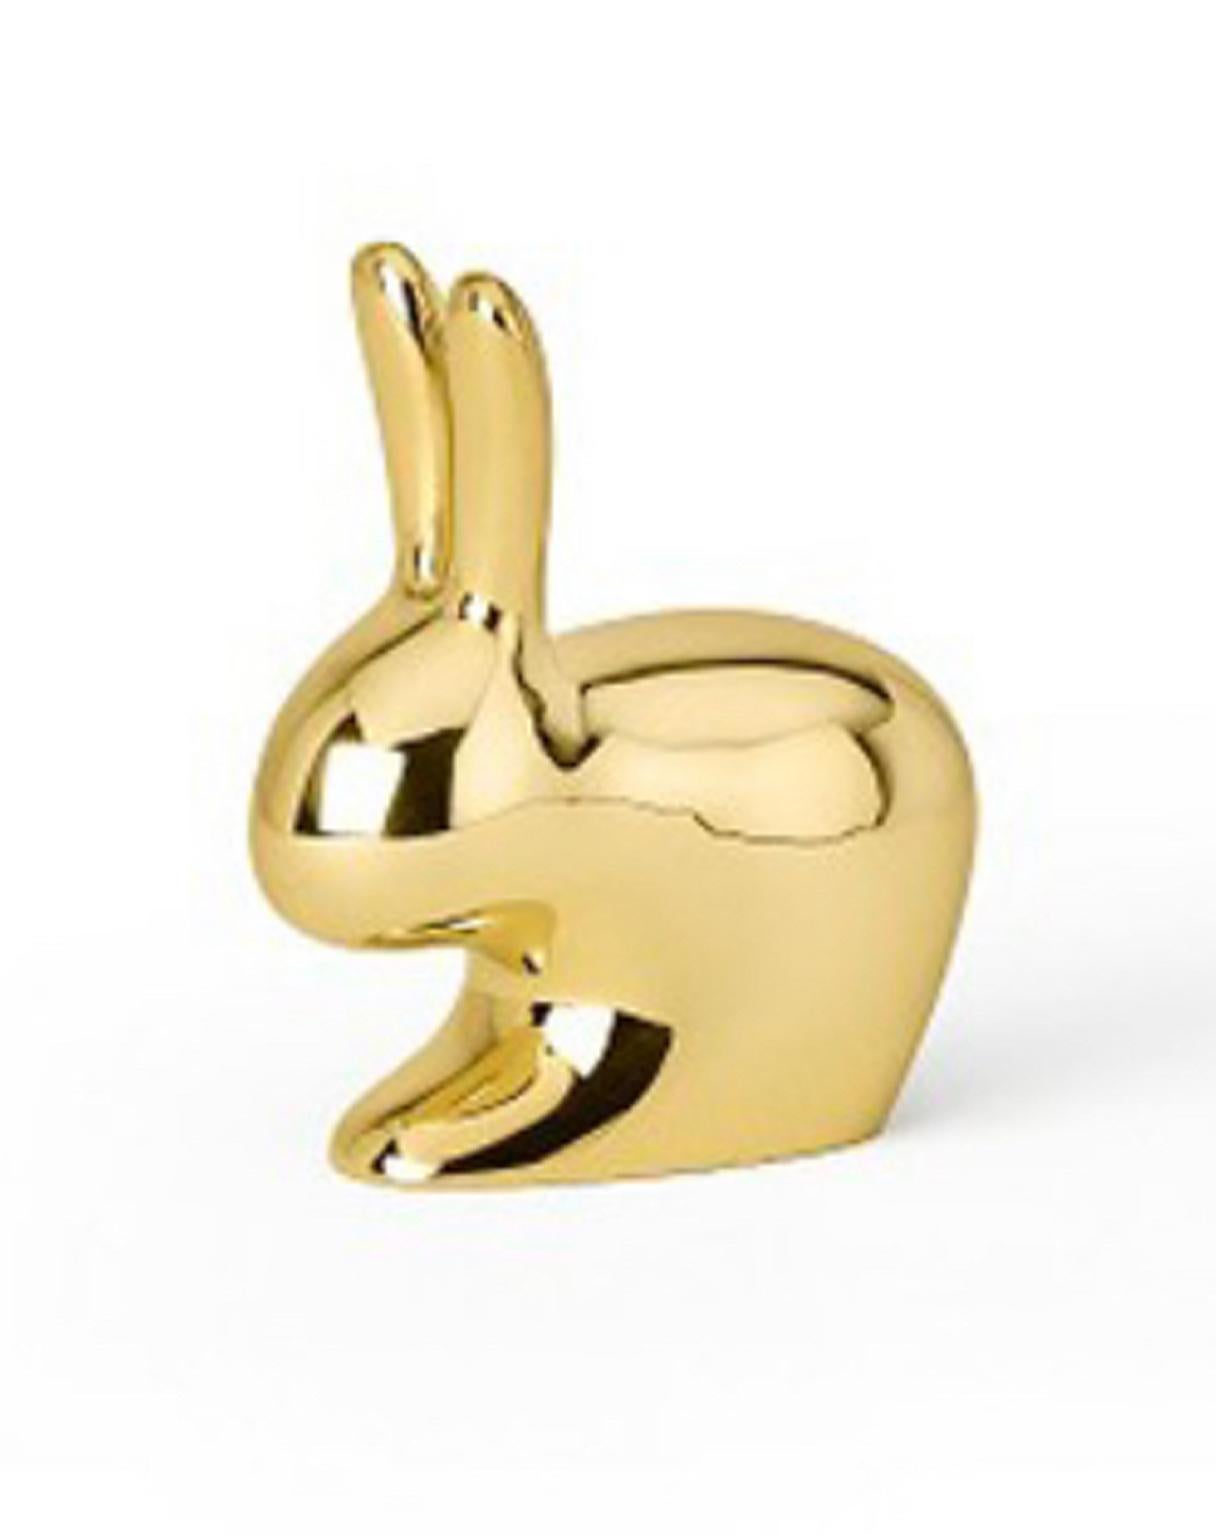 This is the latest iconic object designed by Stefano Giovannoni, for Ghidini 1961. An Italian contemporary design factory. Its designers: Campana Brothers, Mendini, Studio Job and more other archistars.
This figurative sculpture is a rabbit, a